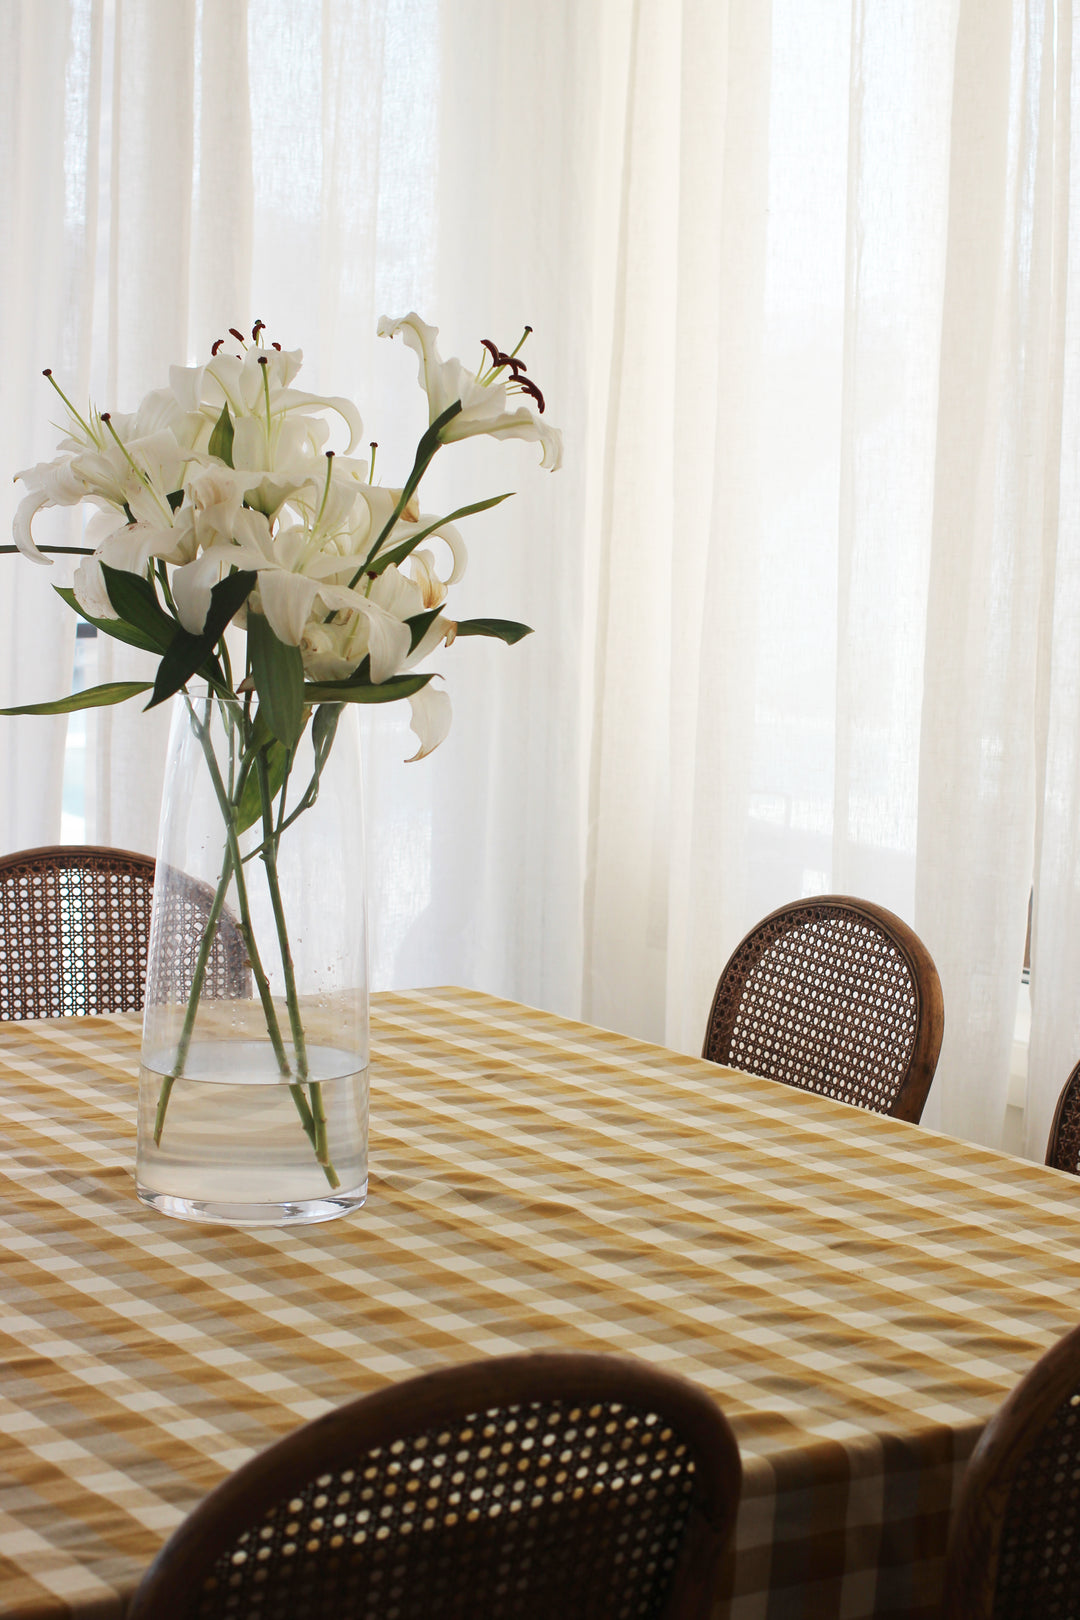 Raine & Humble | Double Check Tablecloth - Yellow Sunset | Shut the Front Door